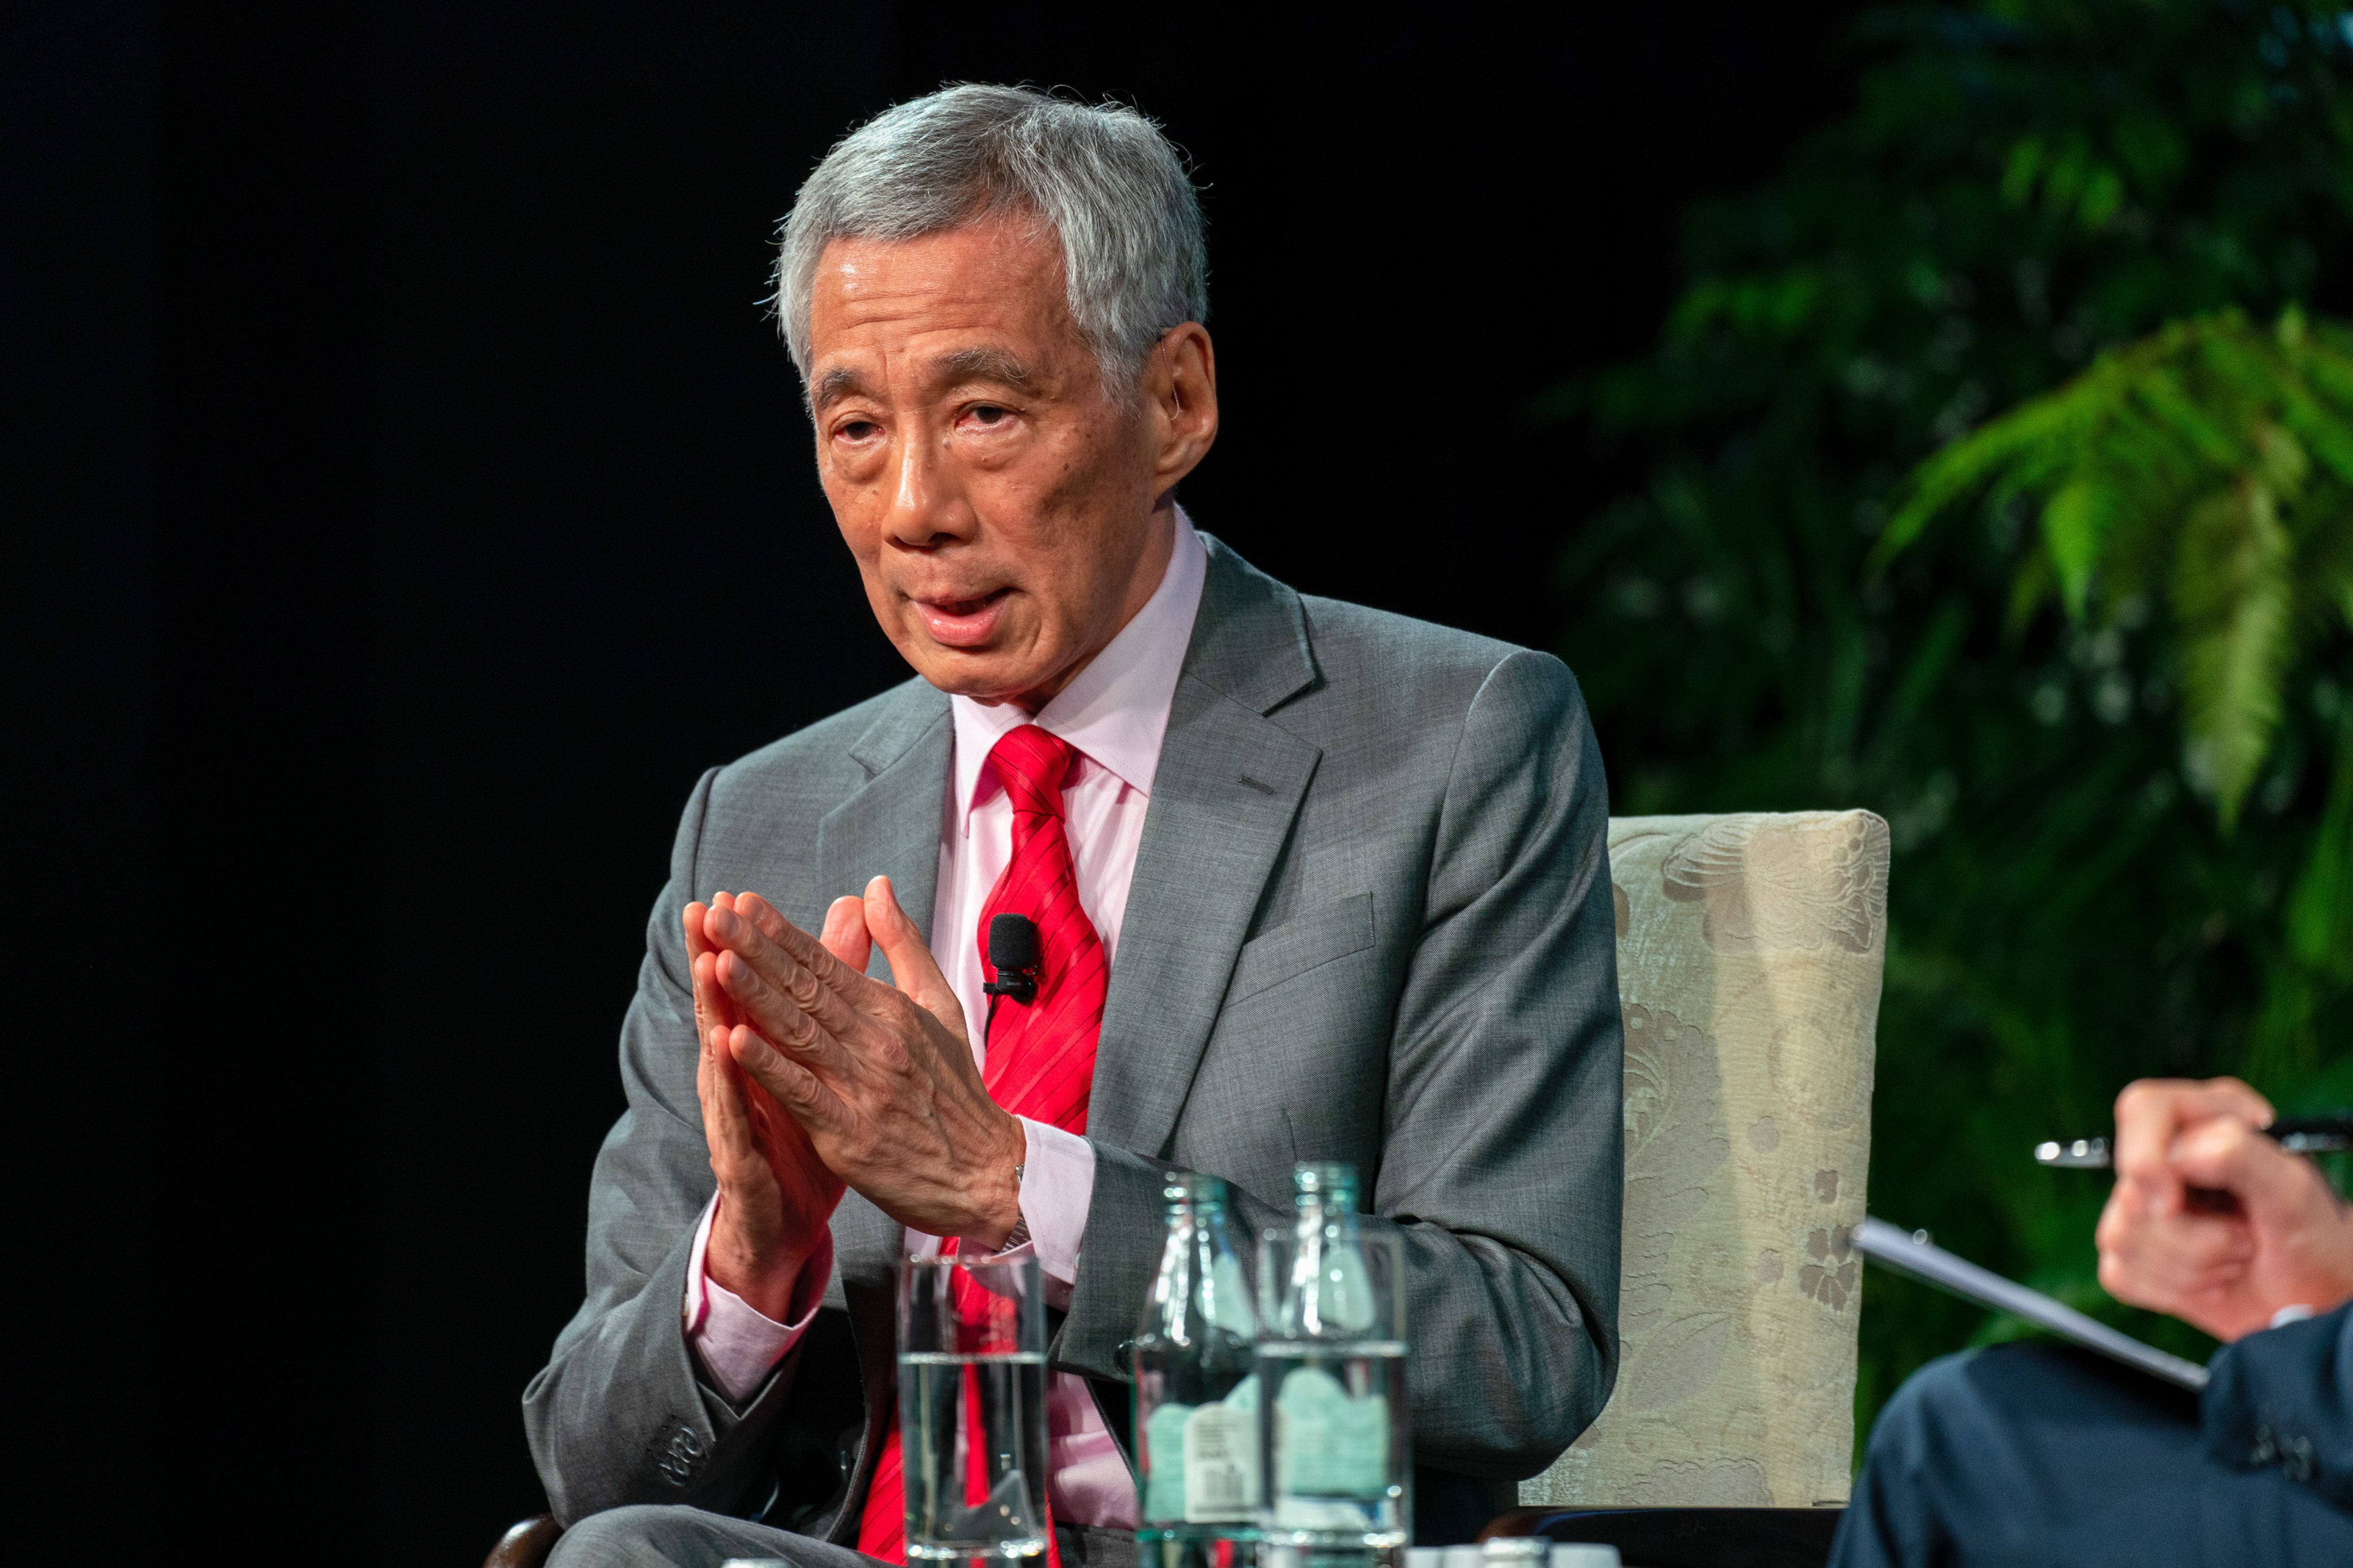 Lee Hsien Loong, Singapore’s prime minister, at a Bloomberg event in November 2021. Photo: Bloomberg